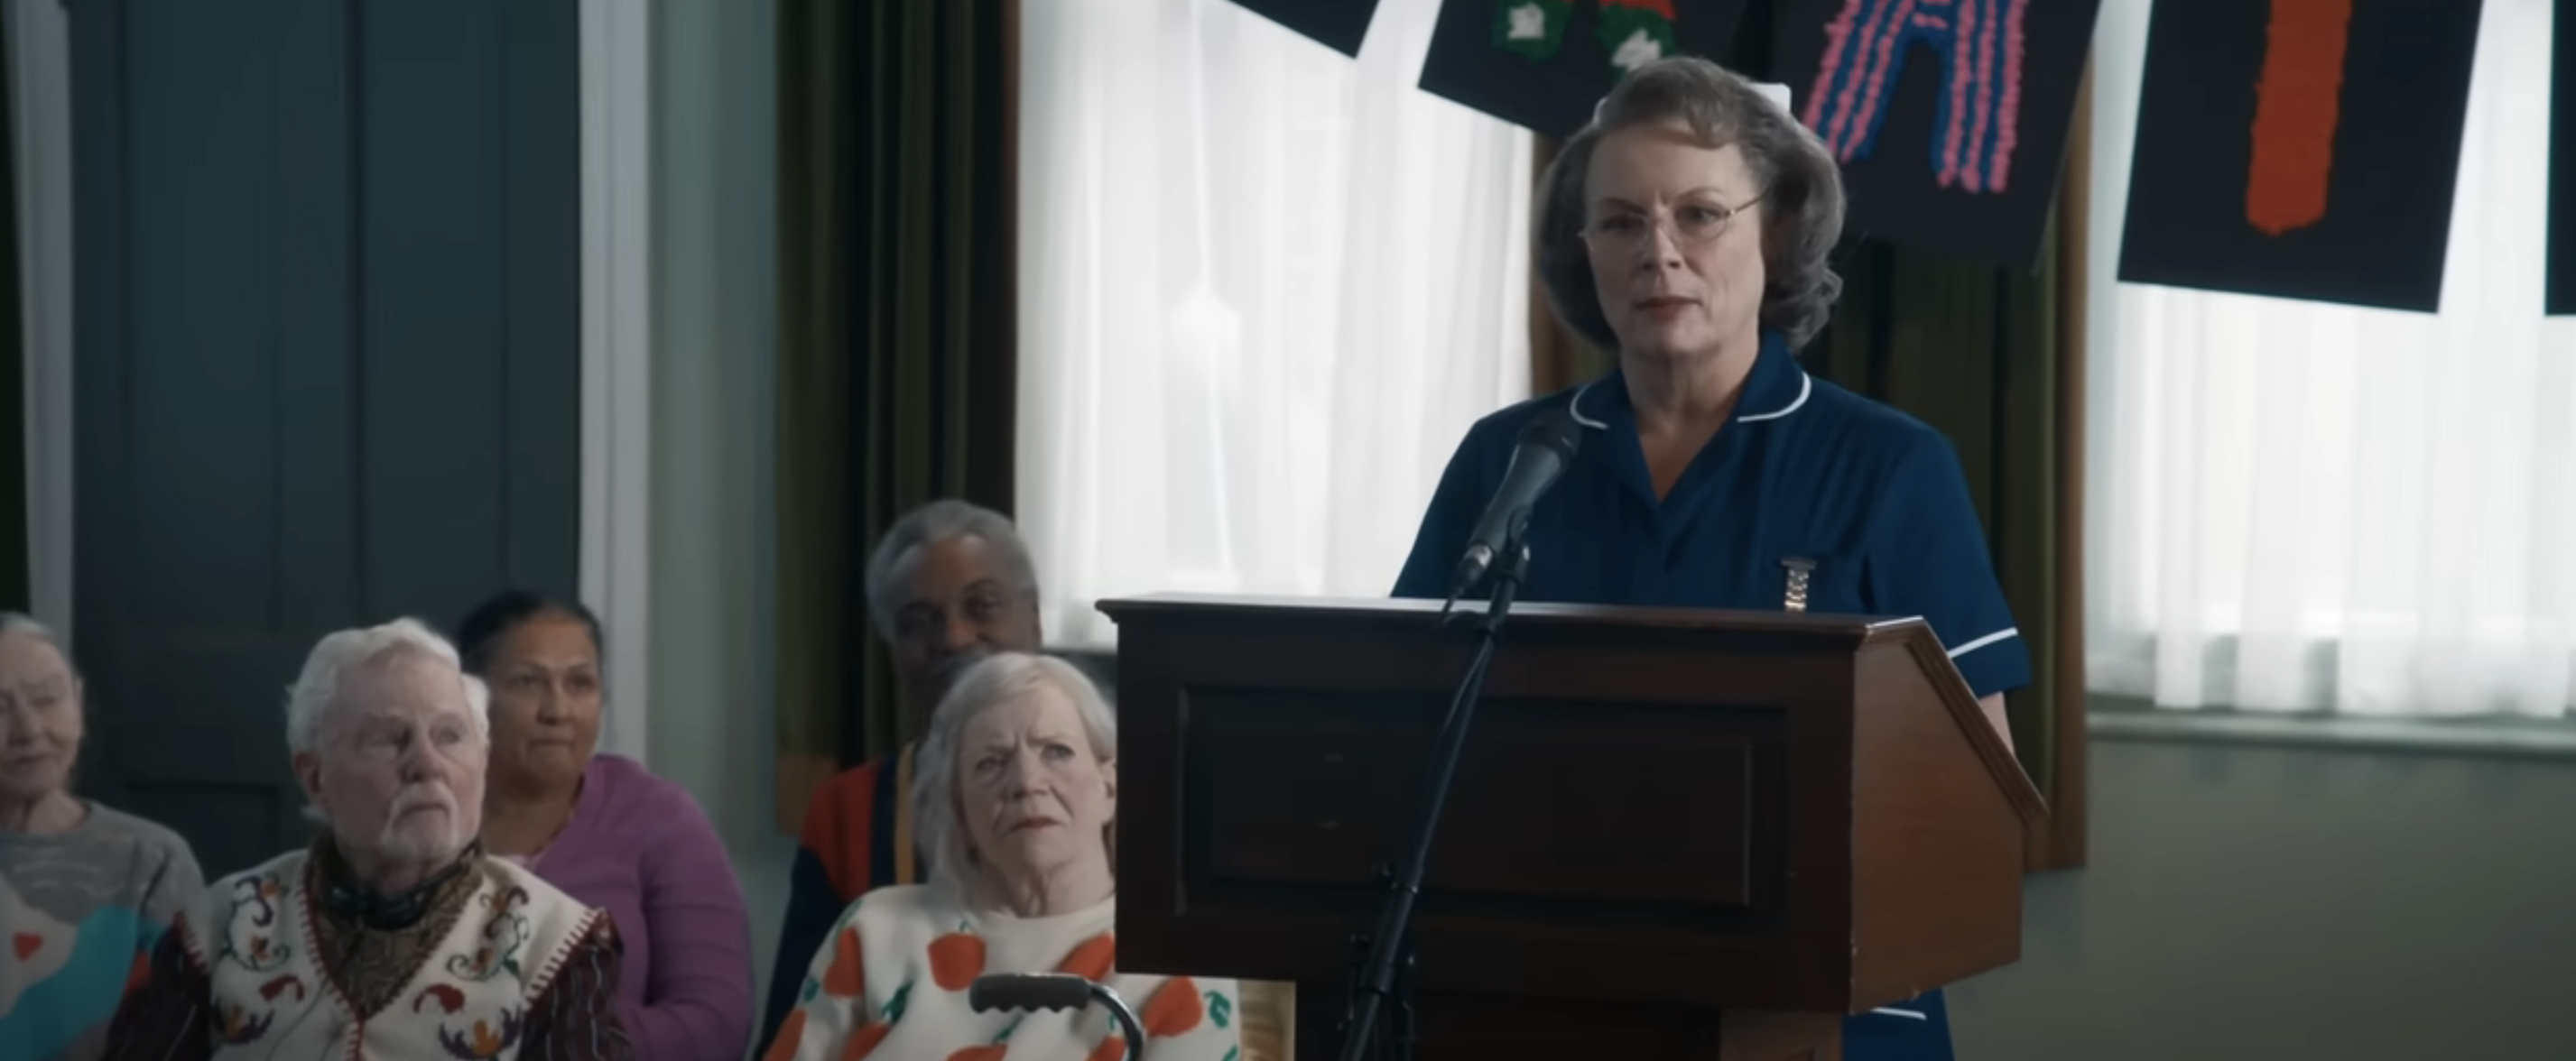 Sister Gilpin in nurse uniform speaking at a podium, audience in background